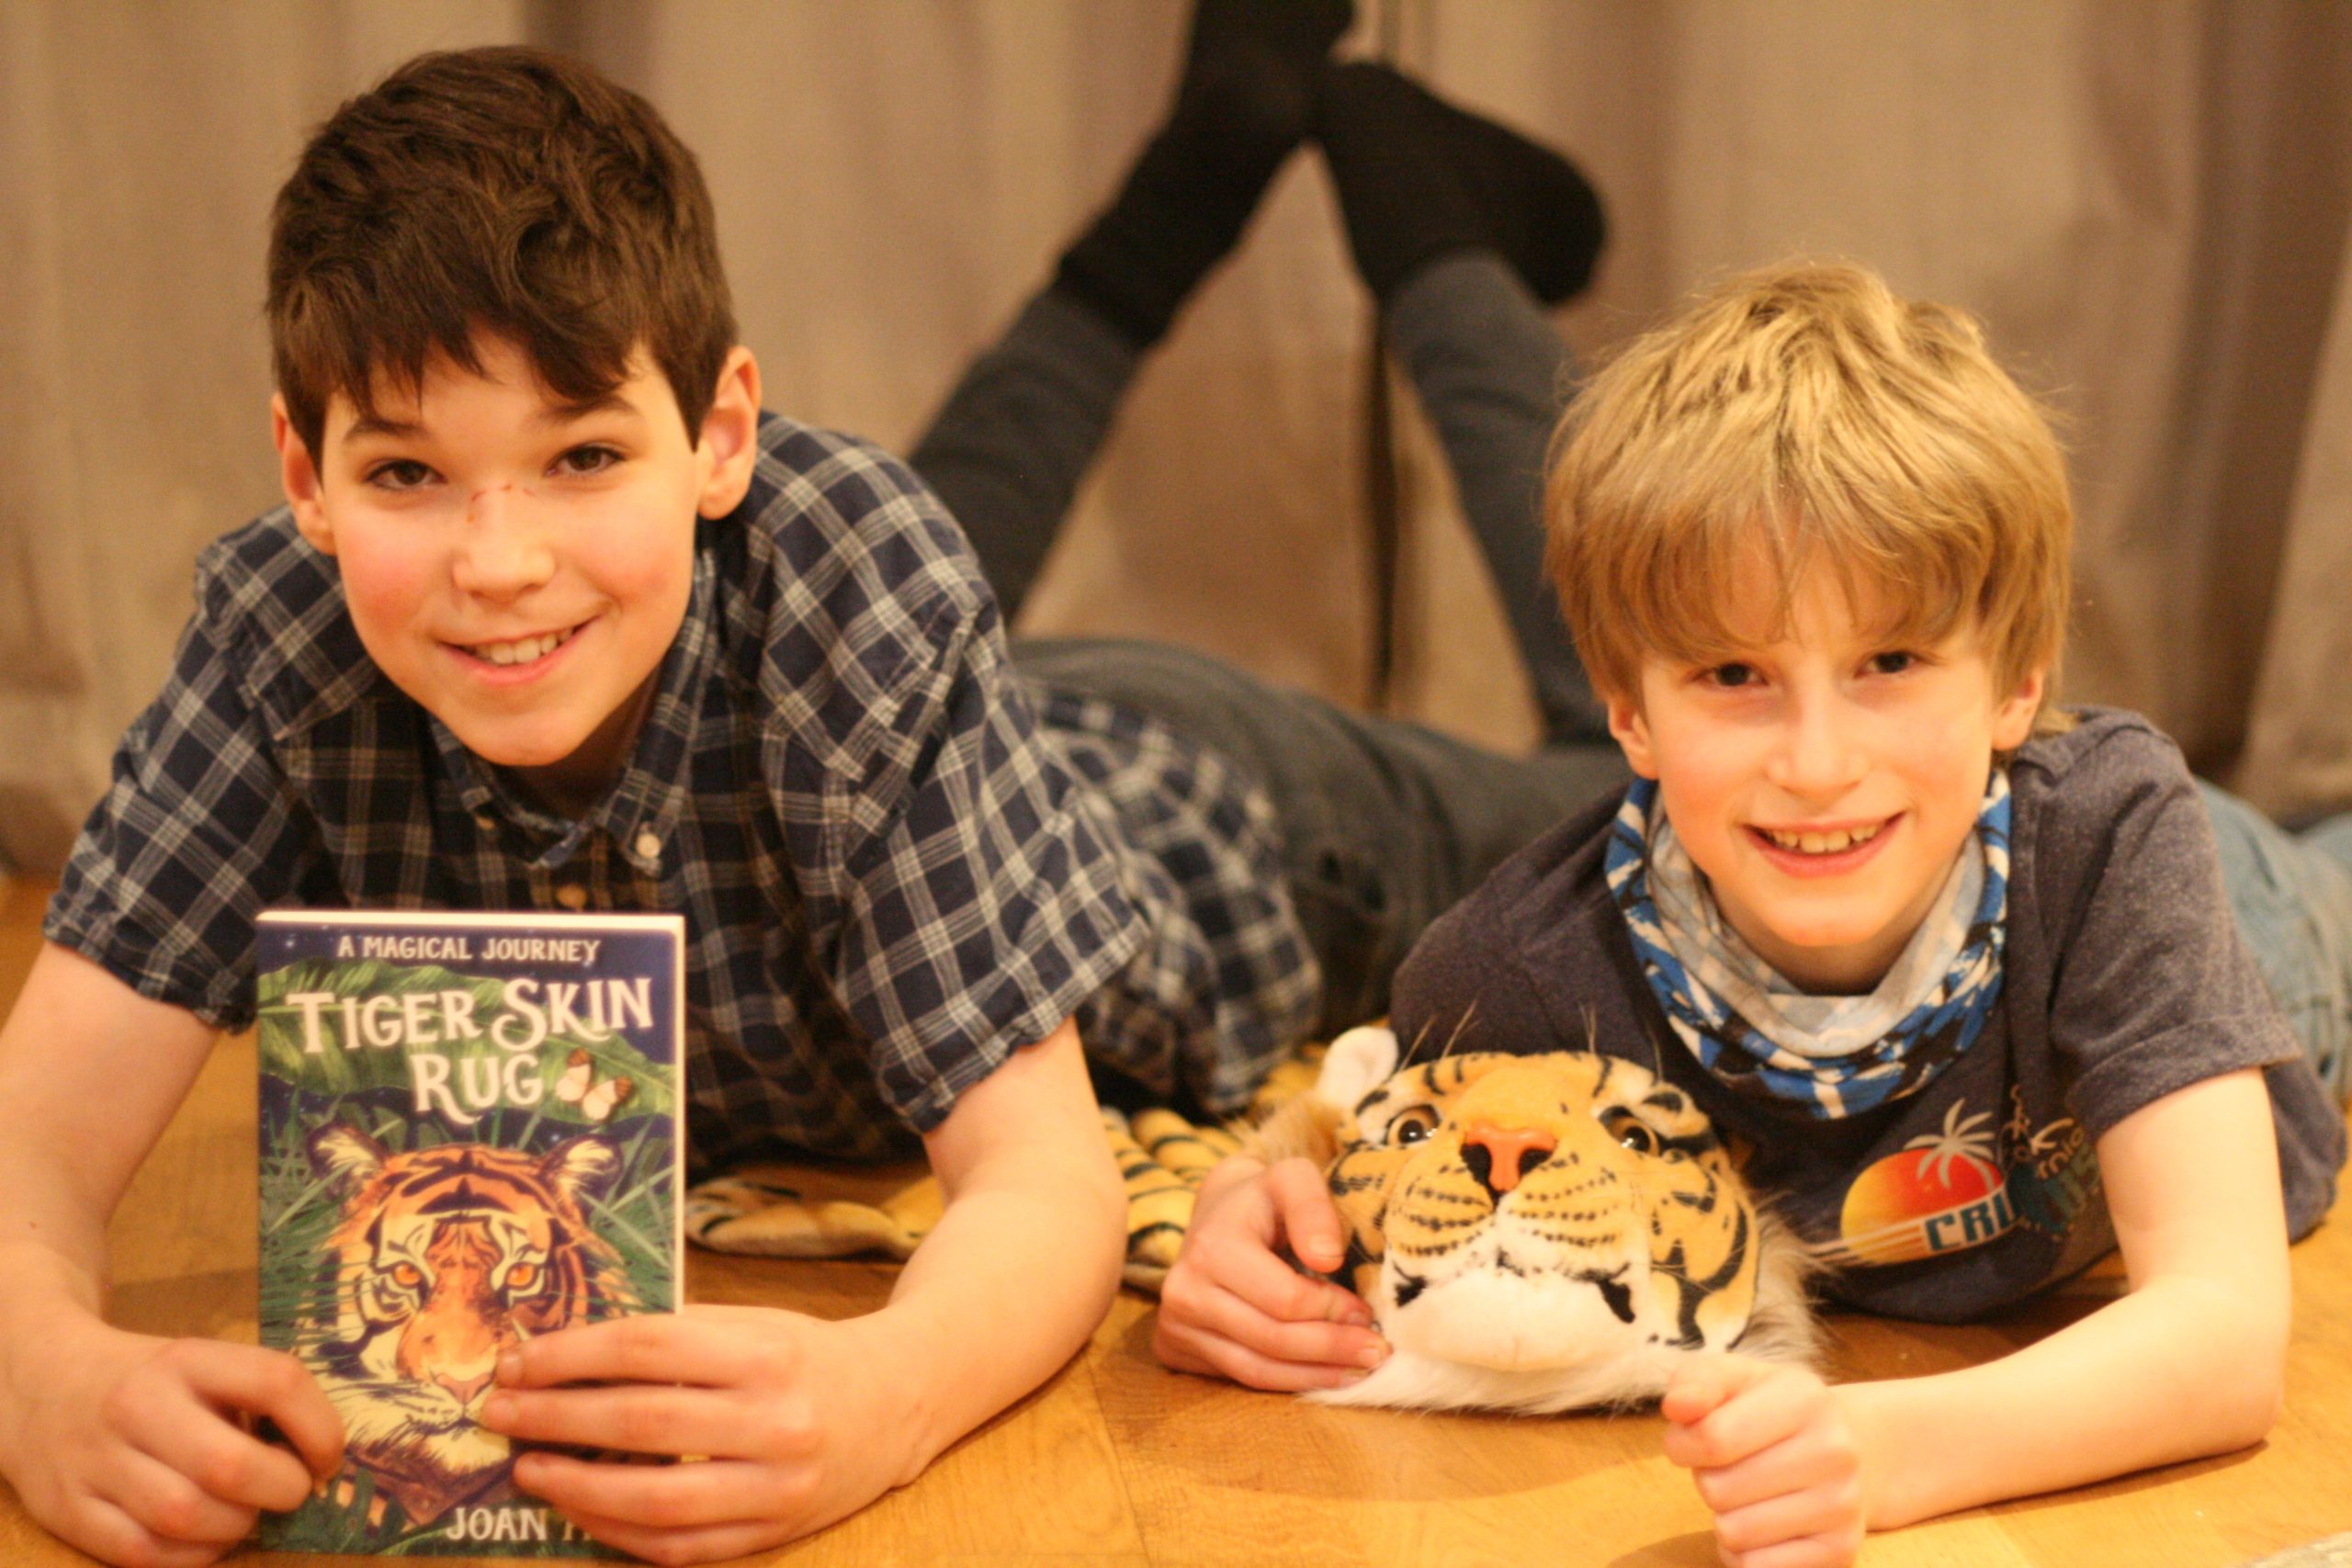 Joan Haig's kids Andrew (11) and Adrian (9) with her novel Tiger Skin Rug.